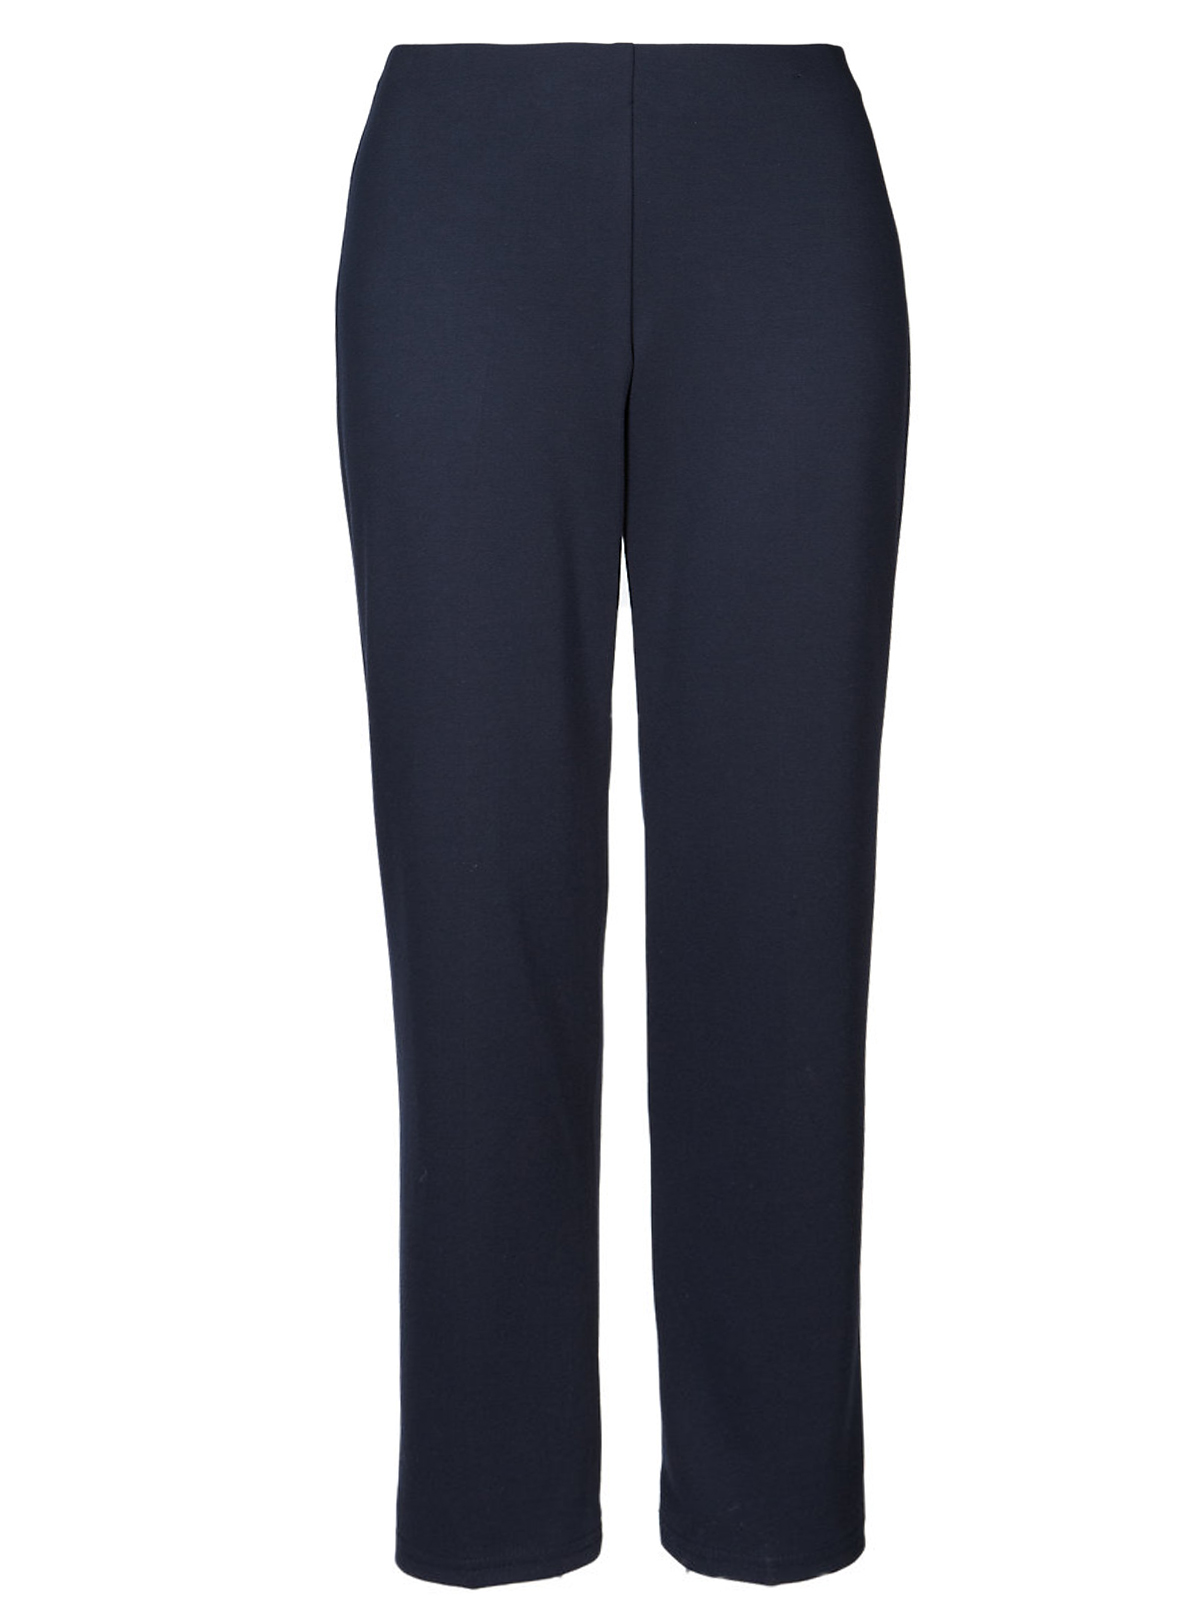 Marks and Spencer - - M&5 NAVY Slim Leg Pull On Ponte Trousers - Size 8 ...